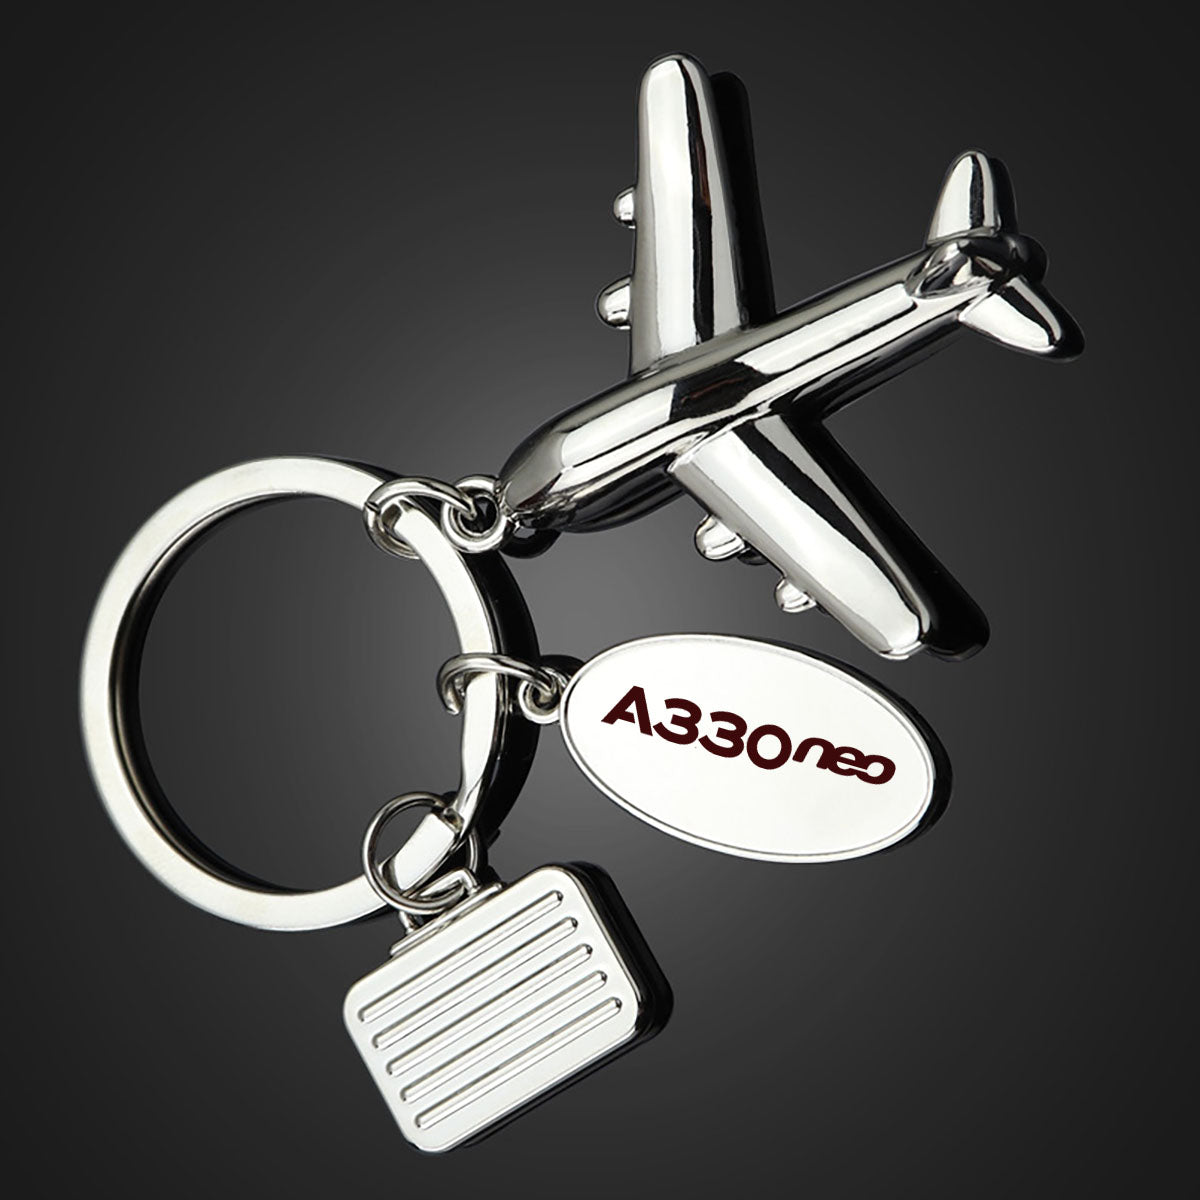 A330neo & Text Designed Suitcase Airplane Key Chains